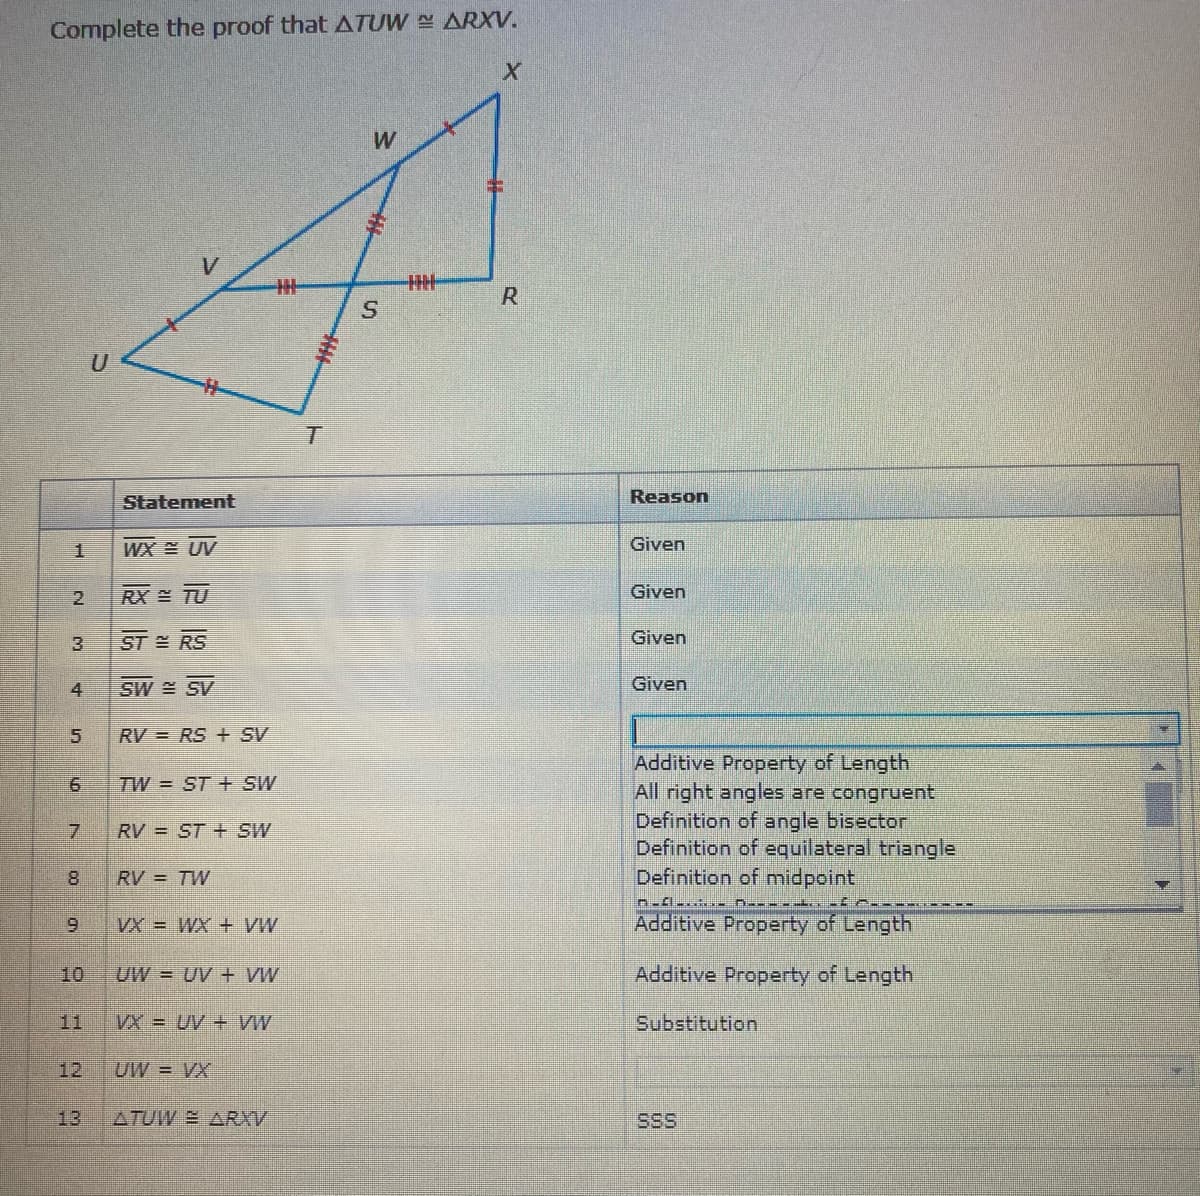 Complete the proof that ATUW ARXV.
R
Statement
Reason
1.
WX UV
Given
2.
RX TU
Given
3
ST RS
Given
4.
SW SV
Given
RV = RS + SV
Additive Property of Length
All right angles are congruent
Definition of angle bisector
Definition of equilateral triangle
Definition of midpoint
TW = ST +E SW
RV = ST + SW
RV = TW
Additive Property of Length
MA + XM = XA
10
UW = UV + VW
Additive Property of Length
11
VX = UV + VW
Substitution
12
UW = VX
13
ATUW E ARXV
SSS
6.
